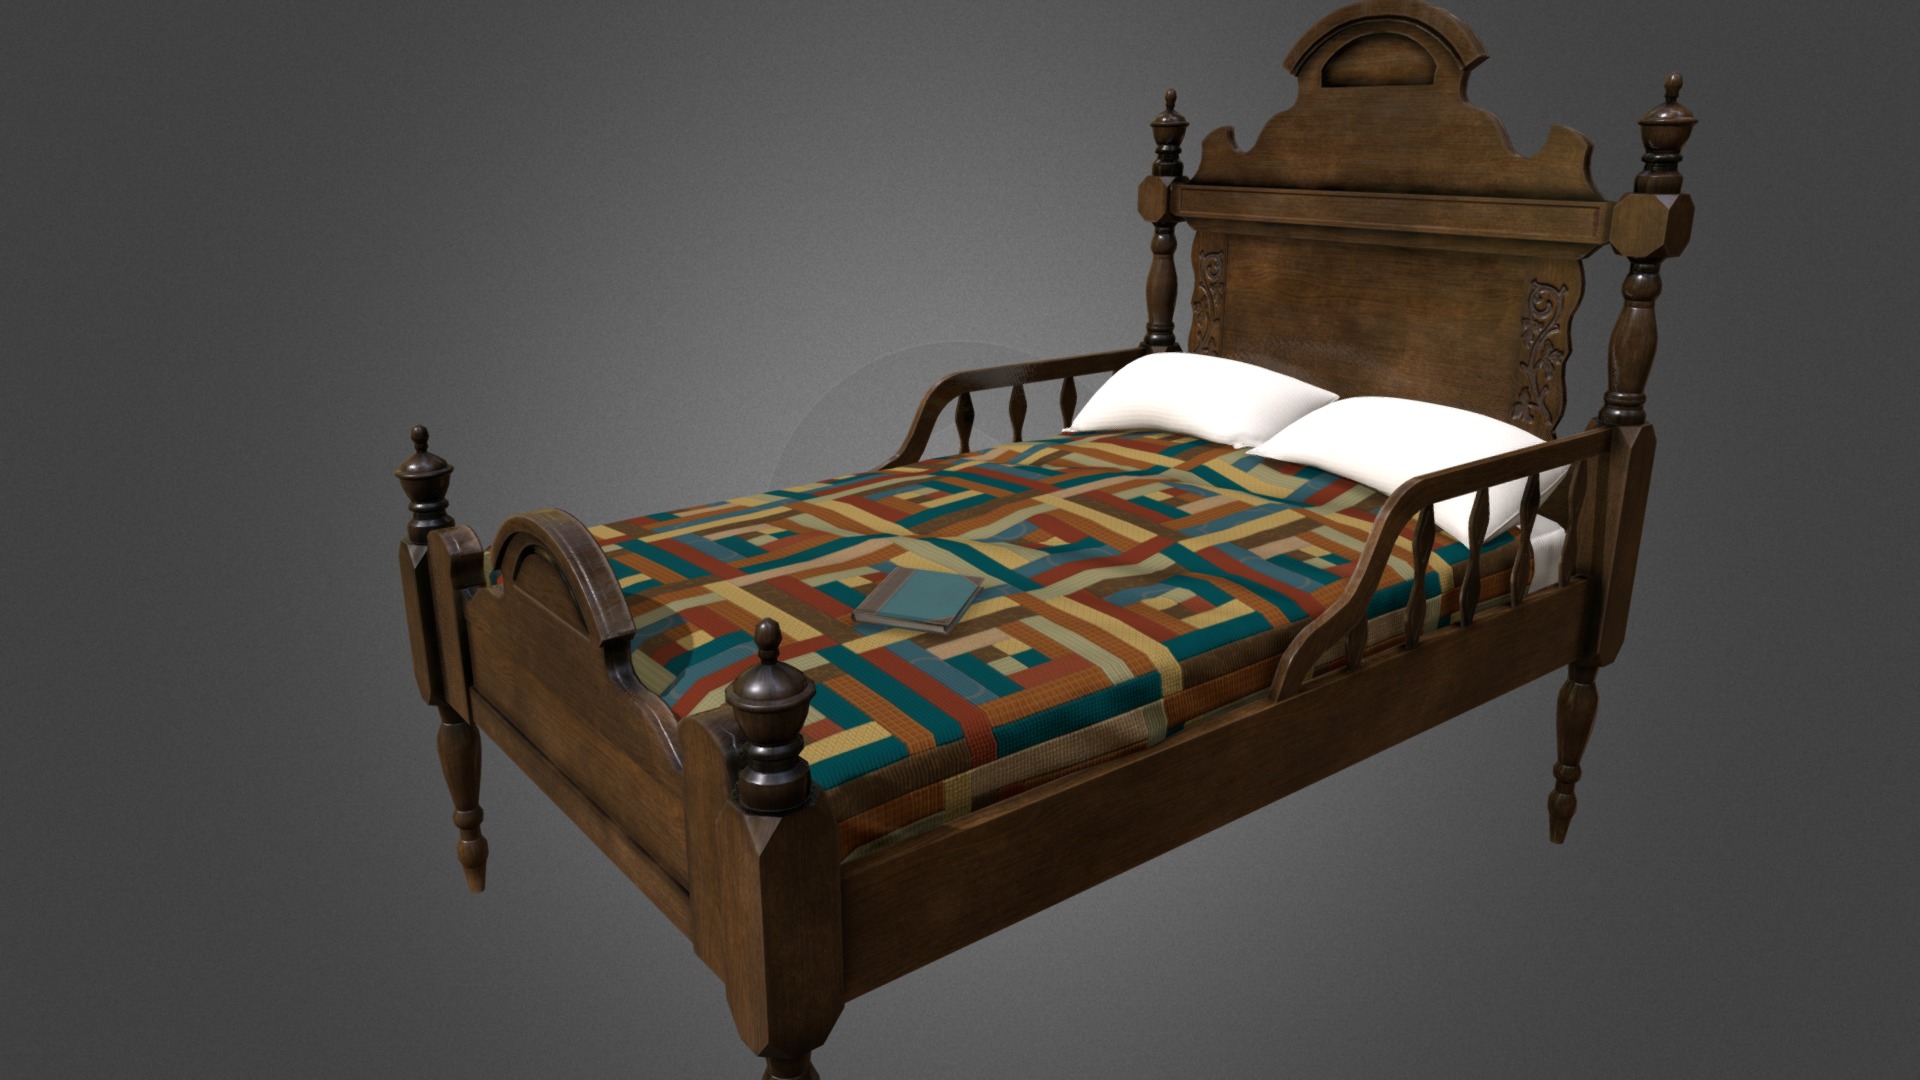 3D model Bed - This is a 3D model of the Bed. The 3D model is about a bed with a blue and yellow comforter.